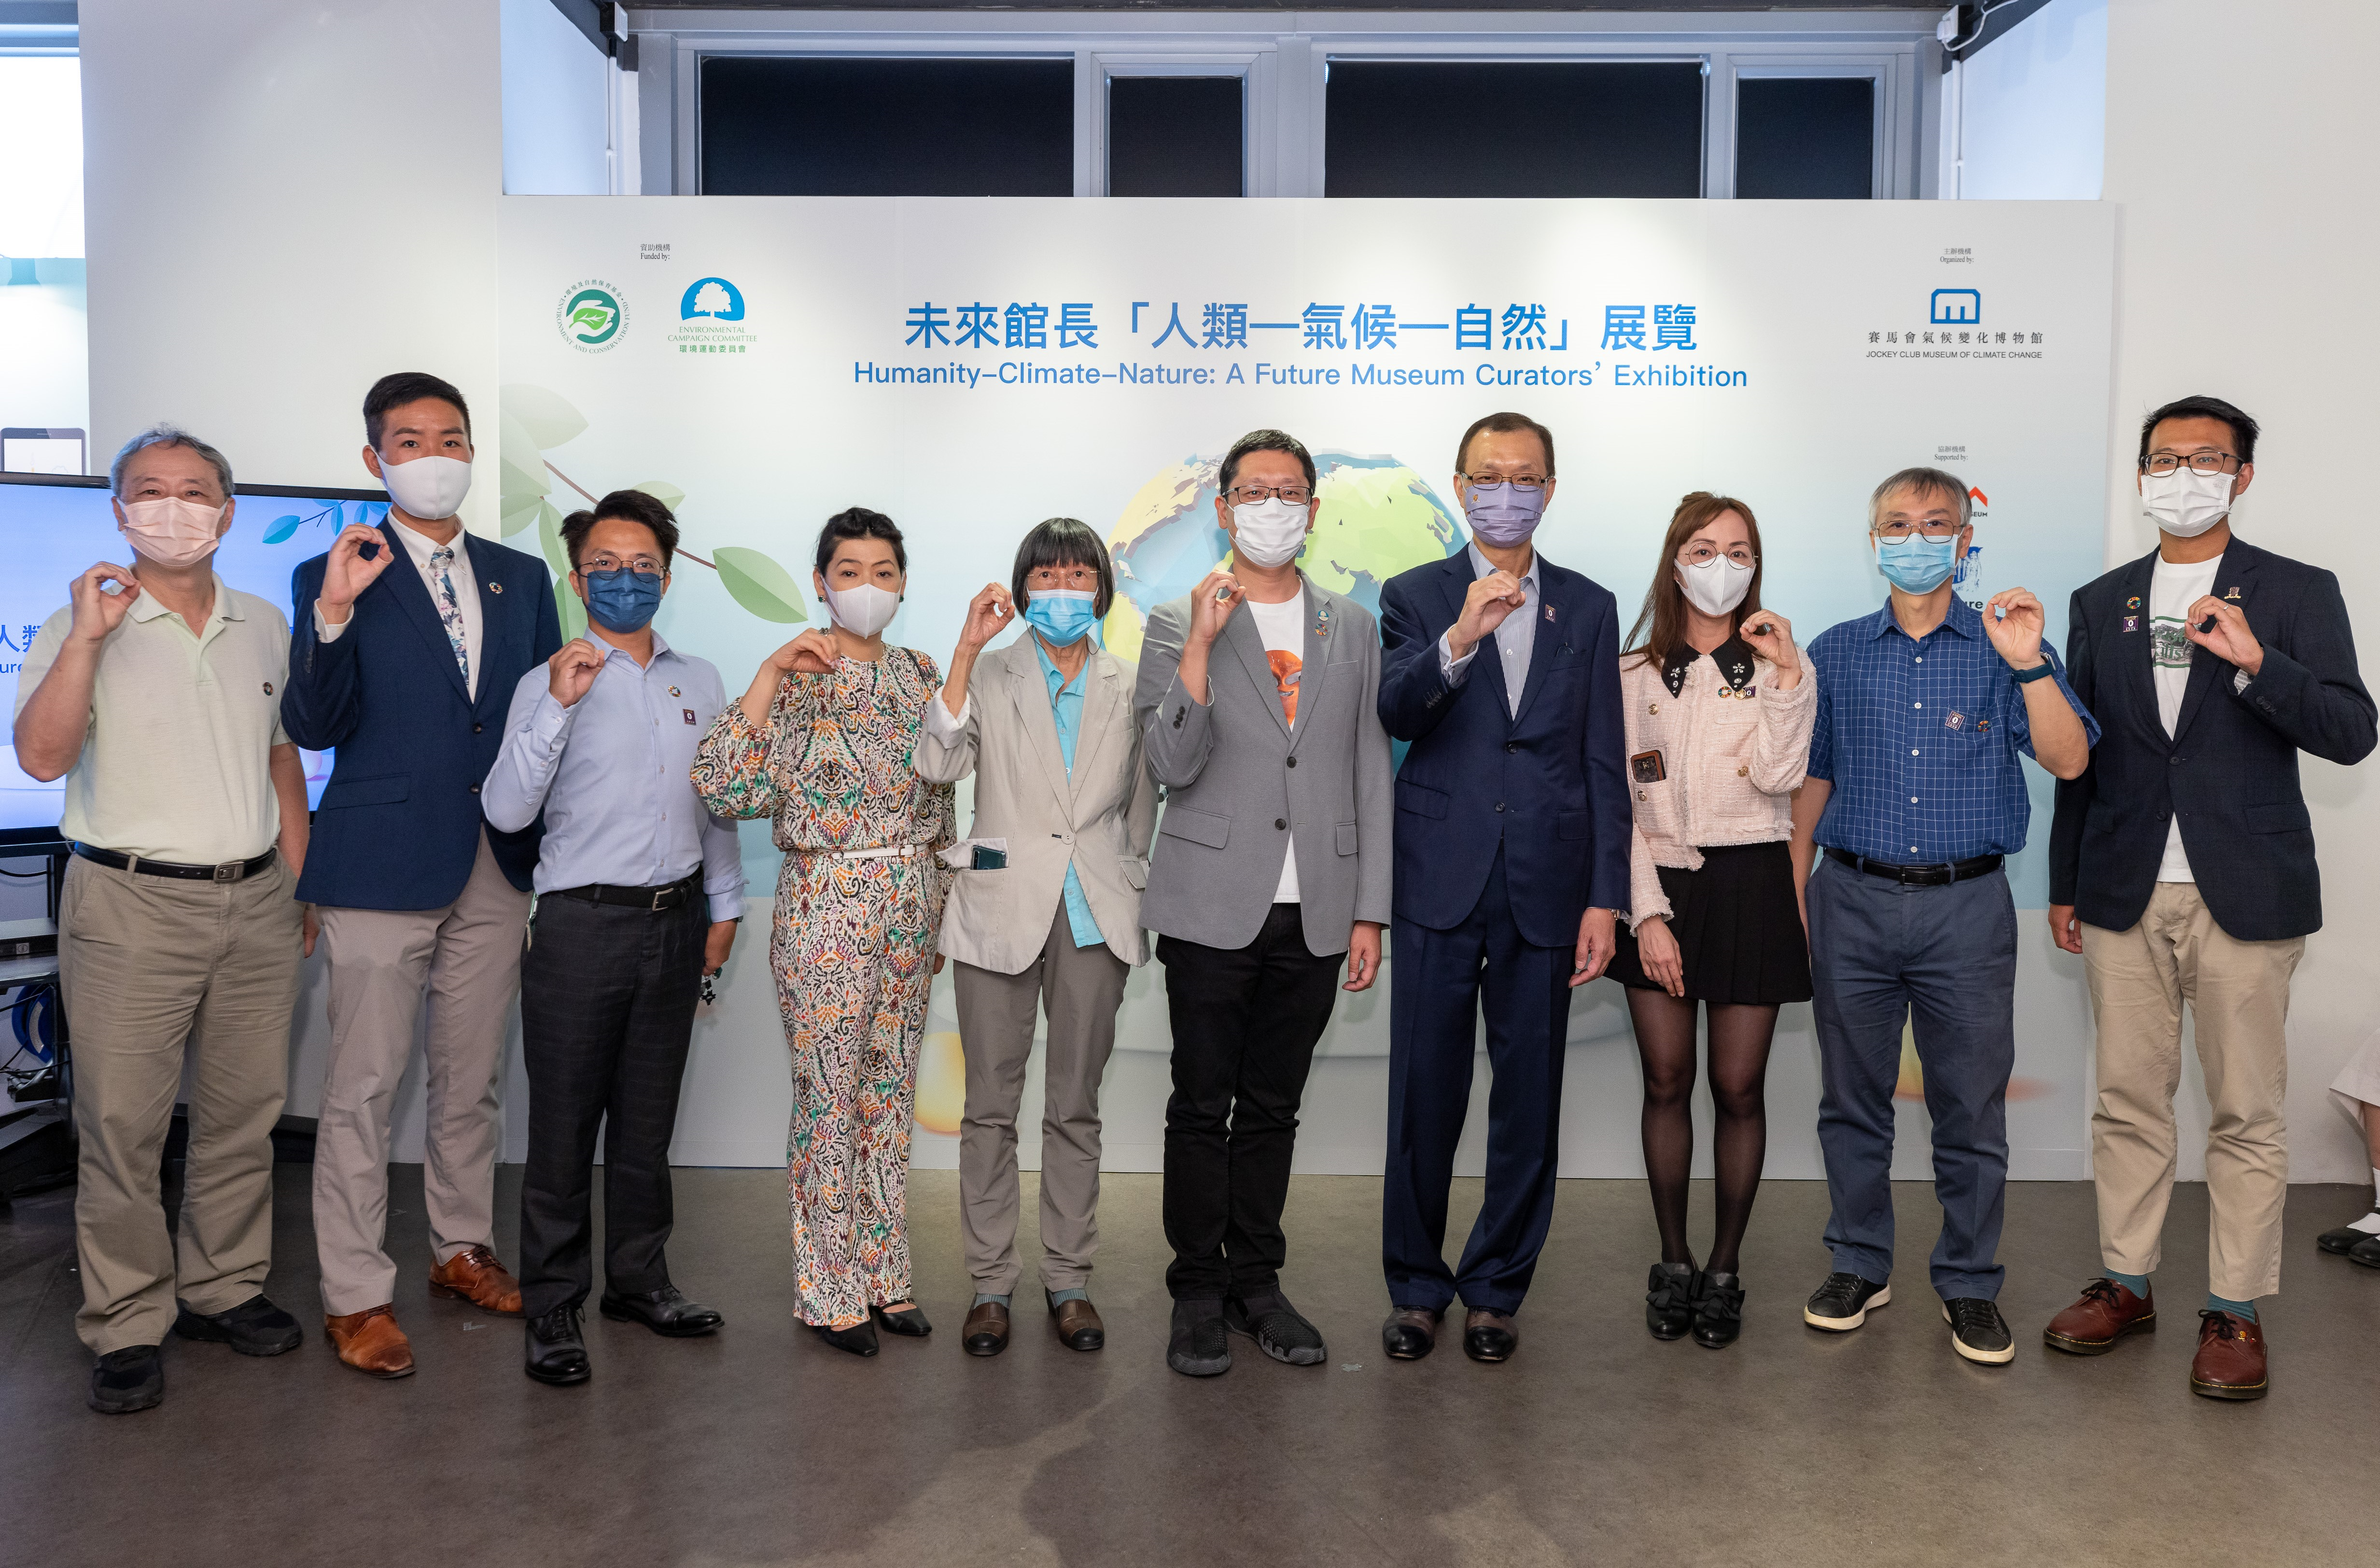 CUHK Jockey Club Museum of Climate Change launches Humanity–Climate–Nature: A Future Museum Curators’ Exhibition